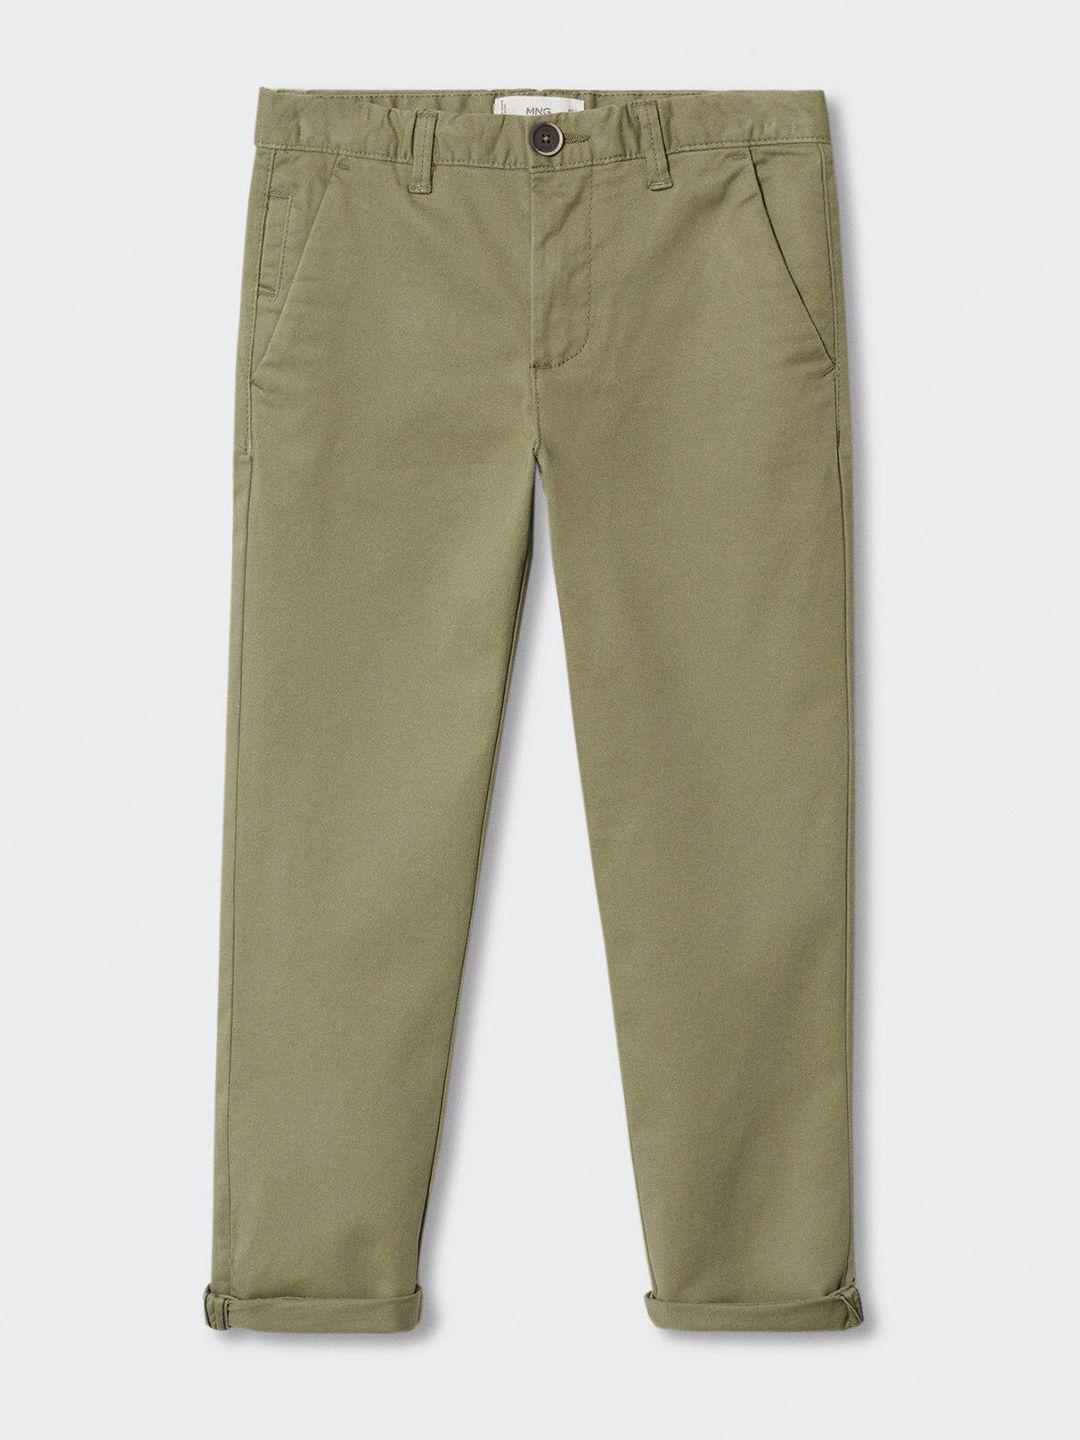 mango kids boys olive green chinos trousers